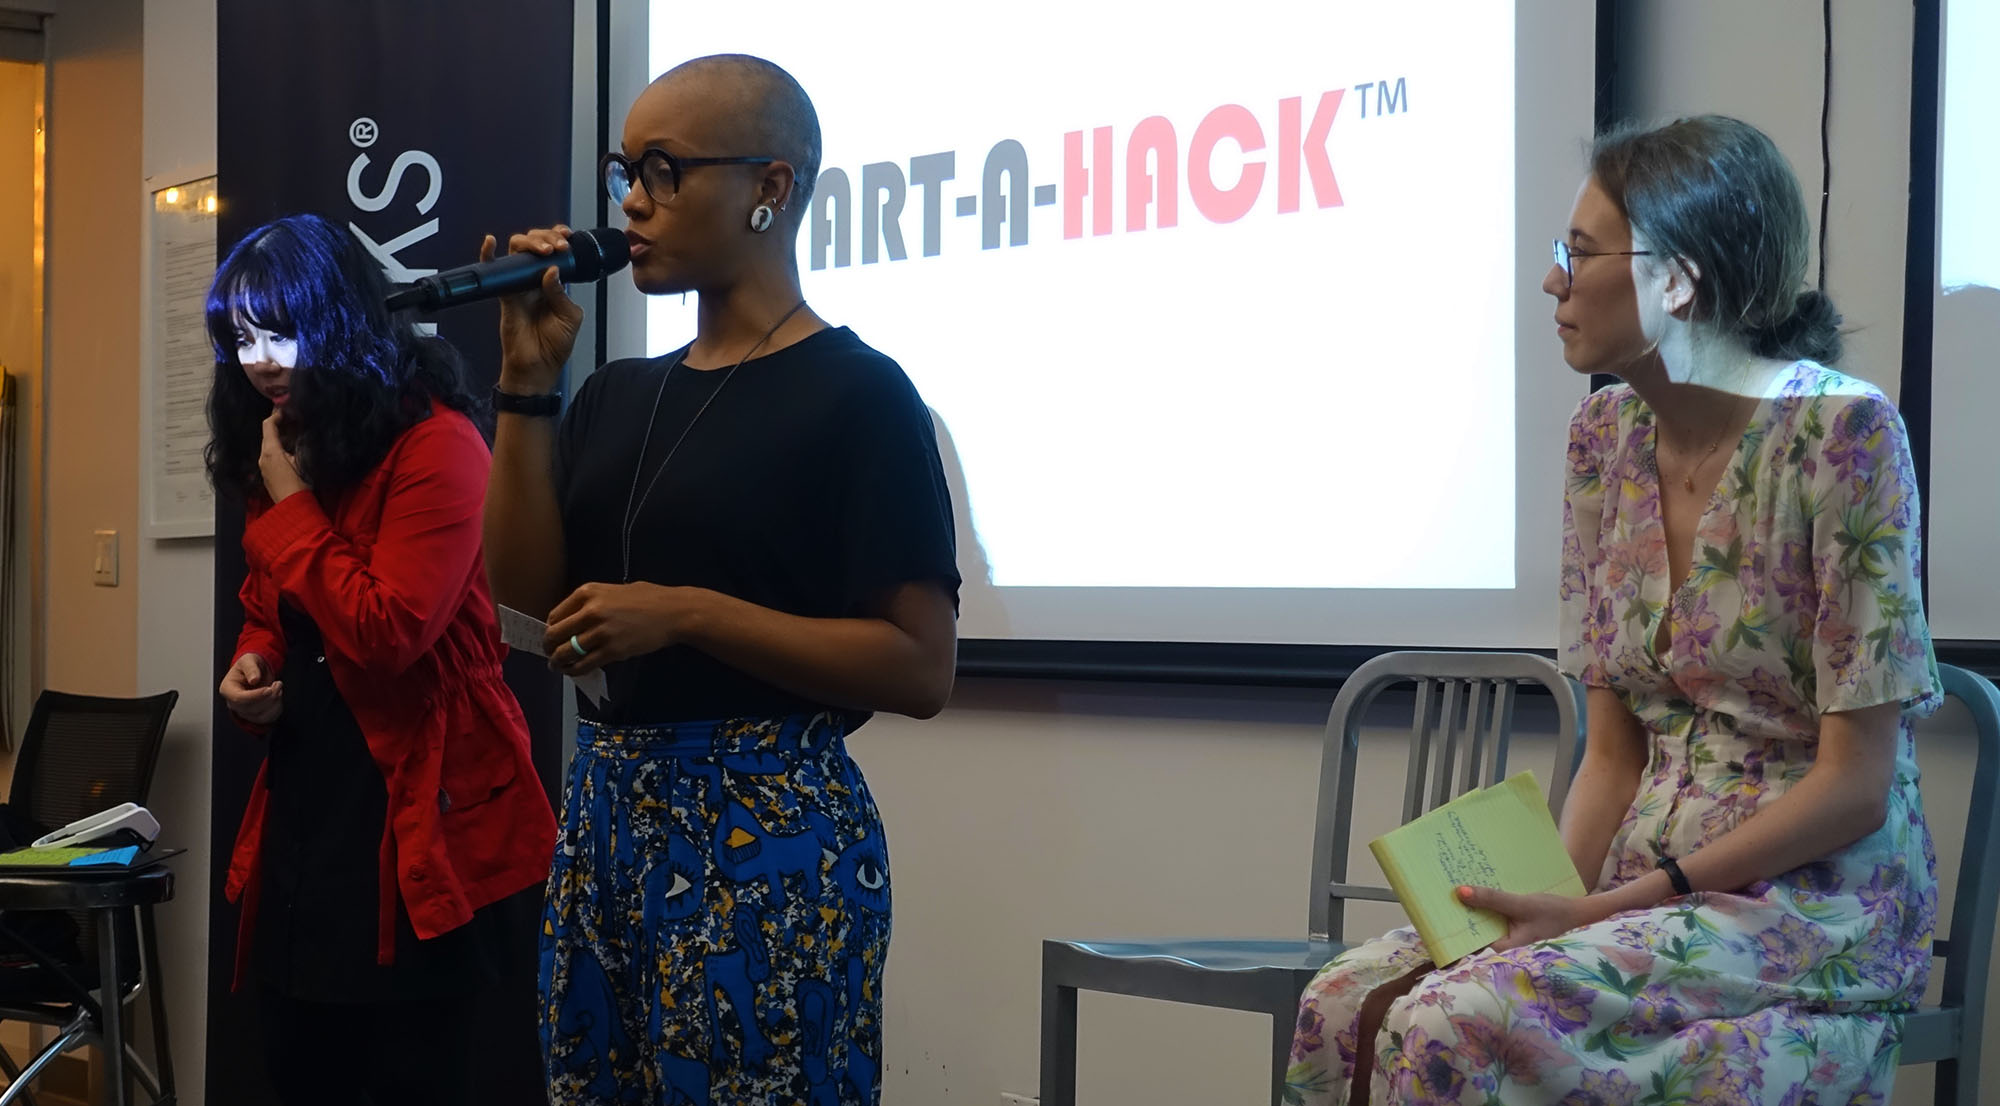 The team performing during the Art-A-Hack final presentation